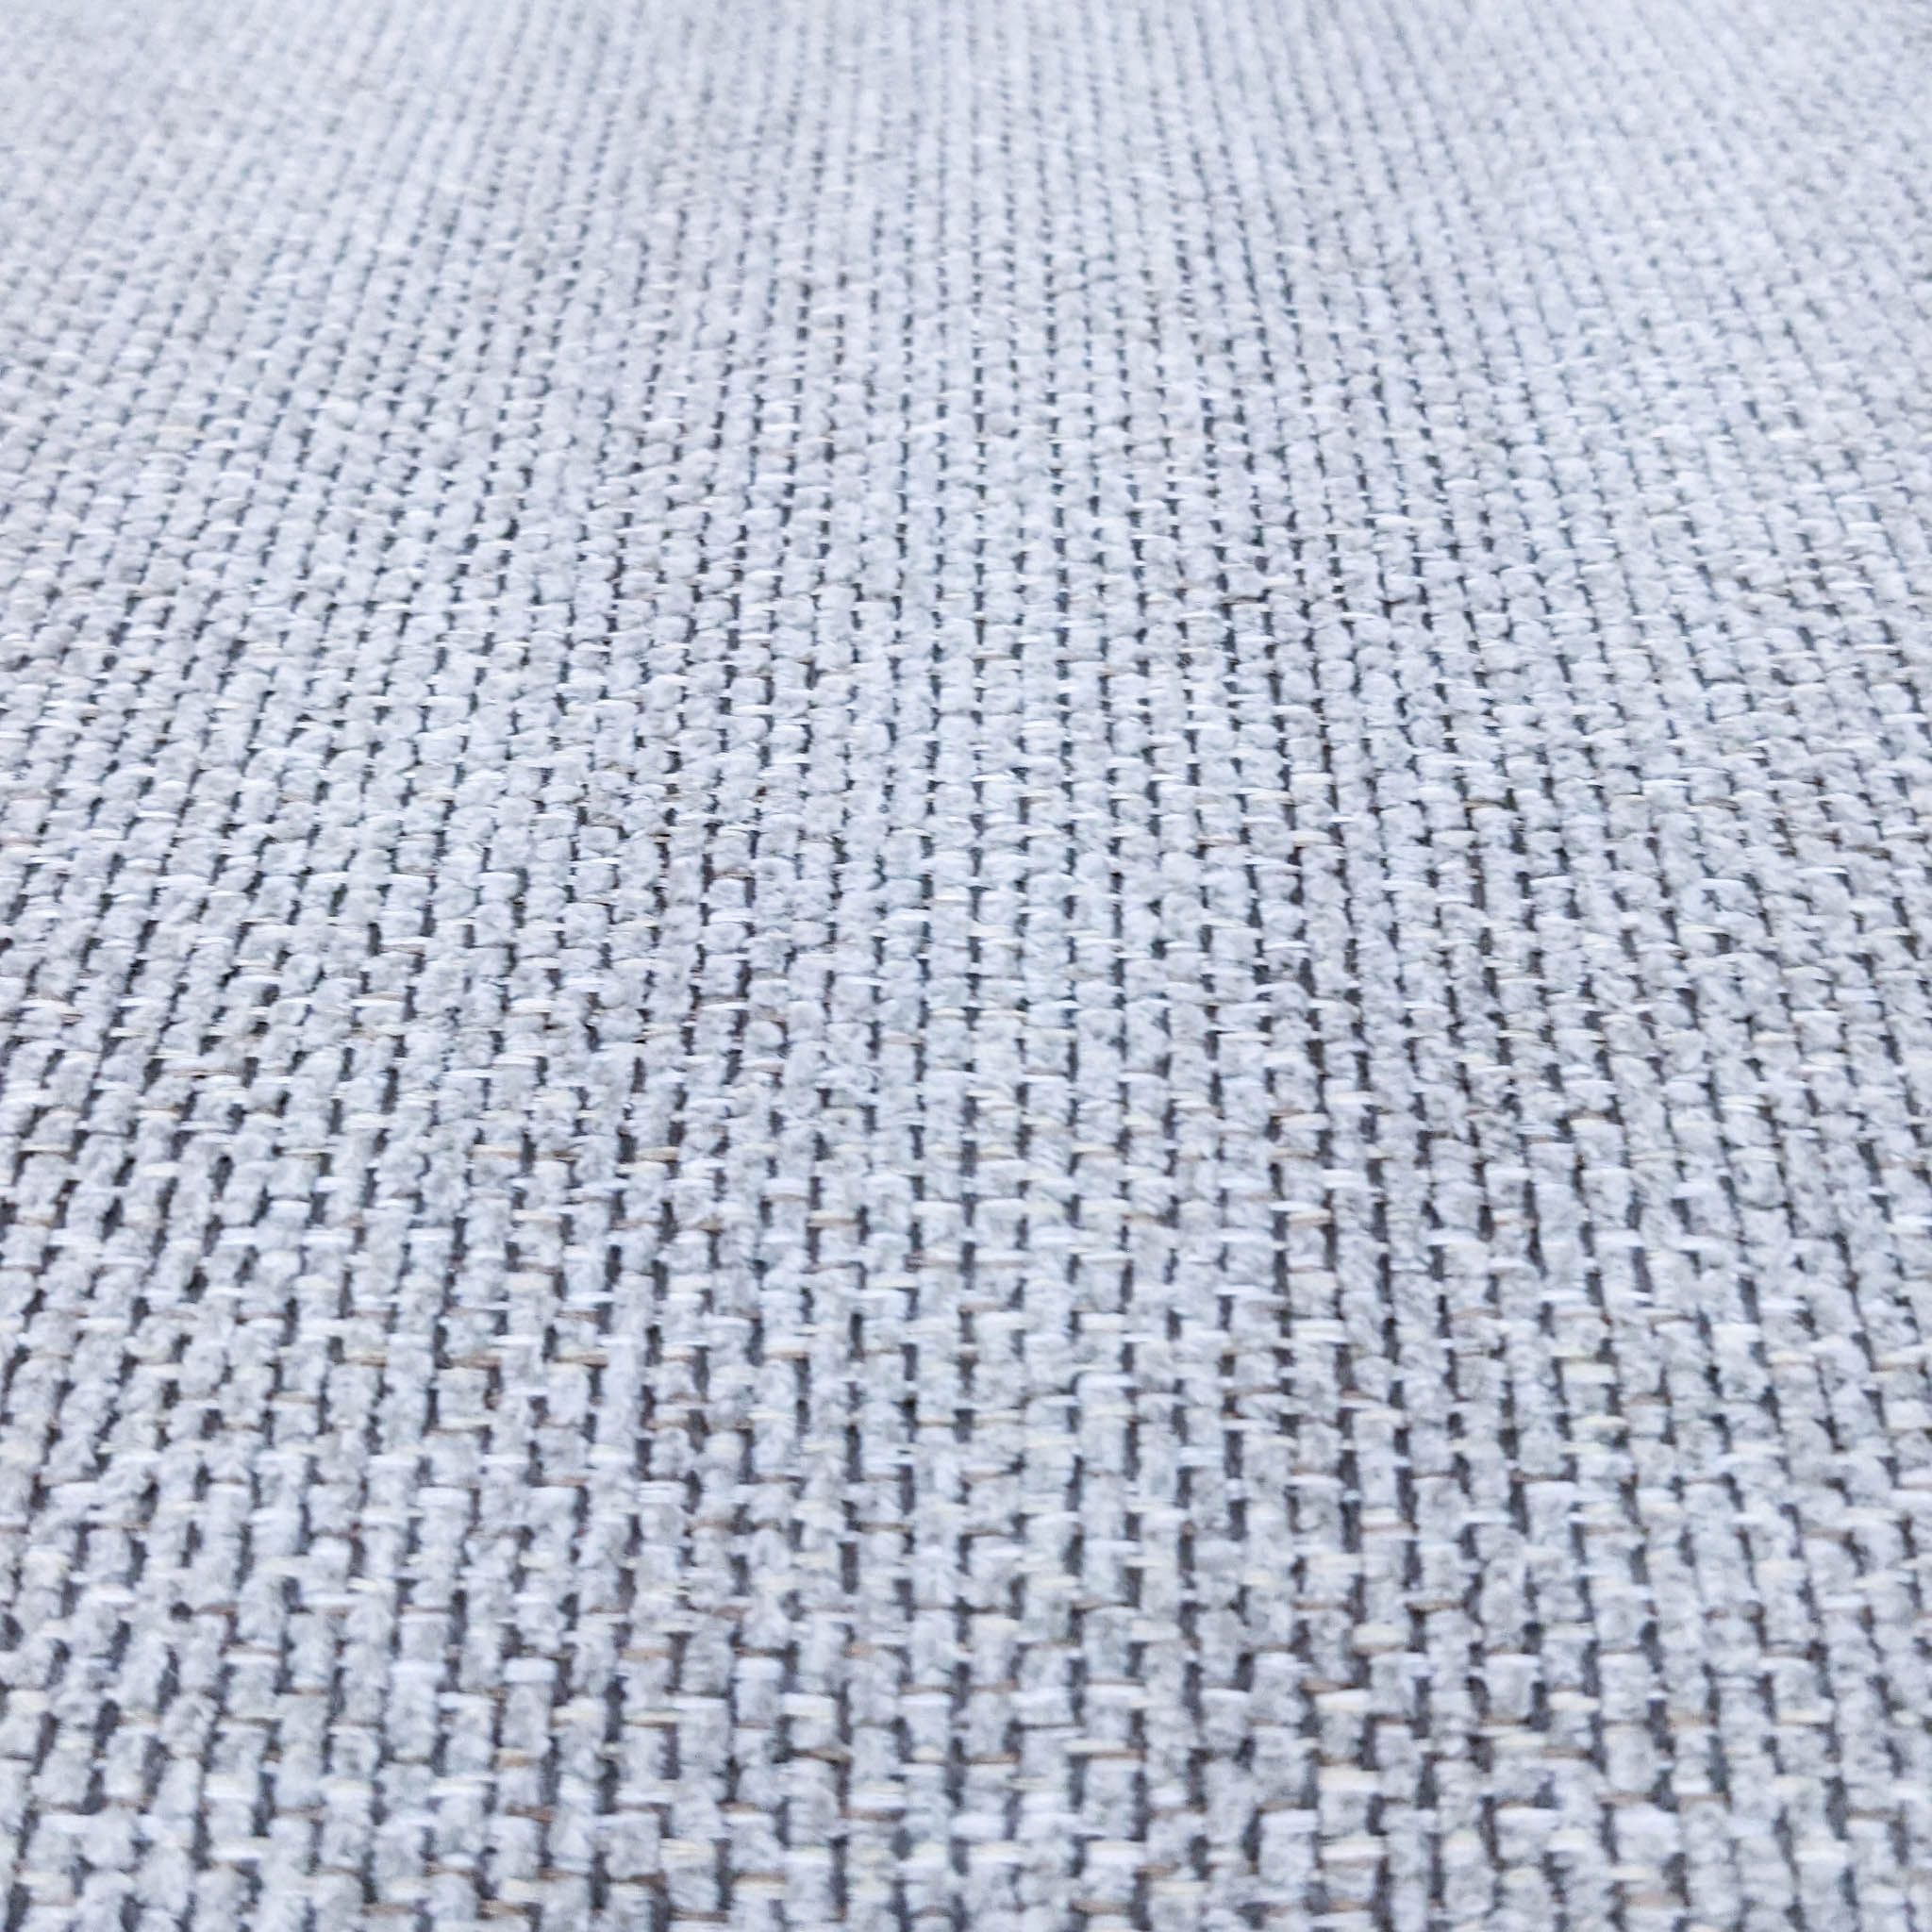 Alt text 2: Close-up of the woven fabric texture on a large, square, neutral-colored Costco ottoman with dark legs.